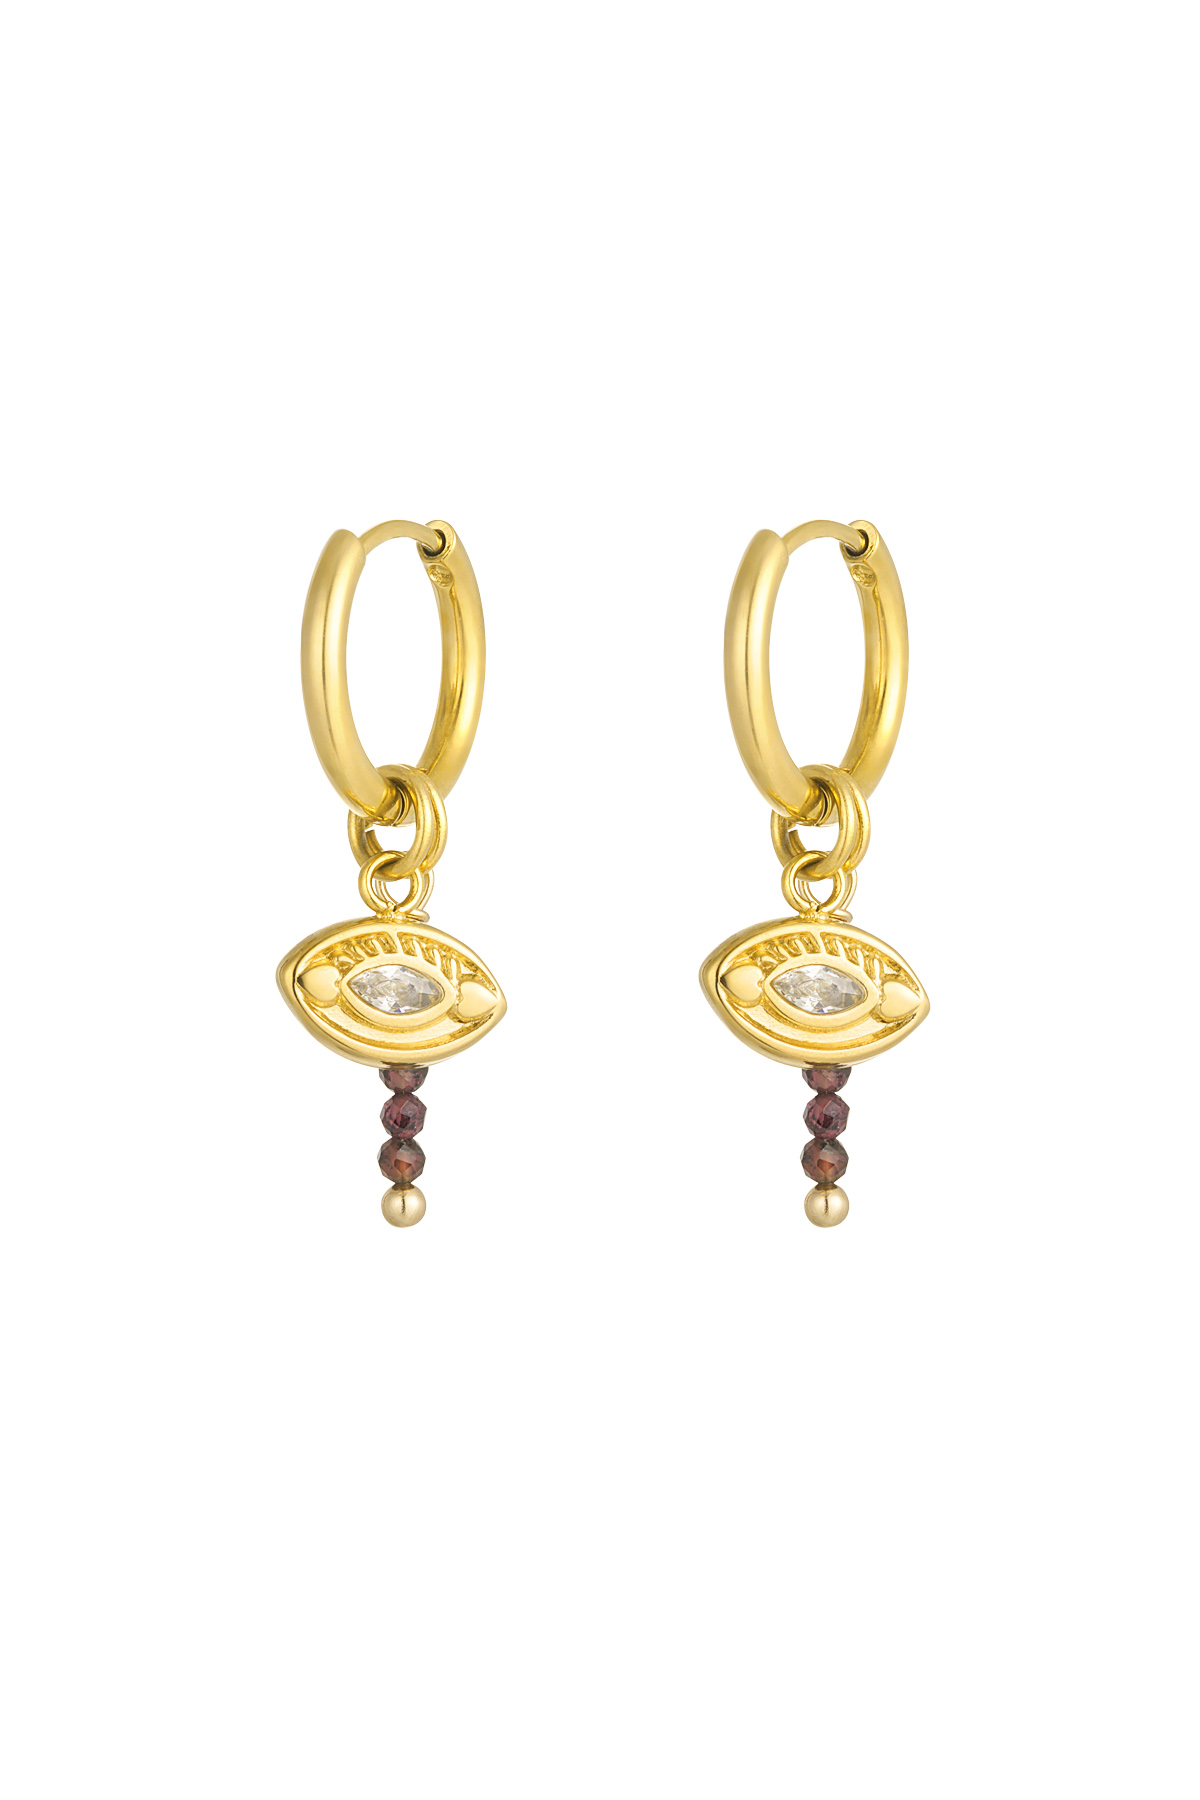 Eye earrings with beads - gold/brown 